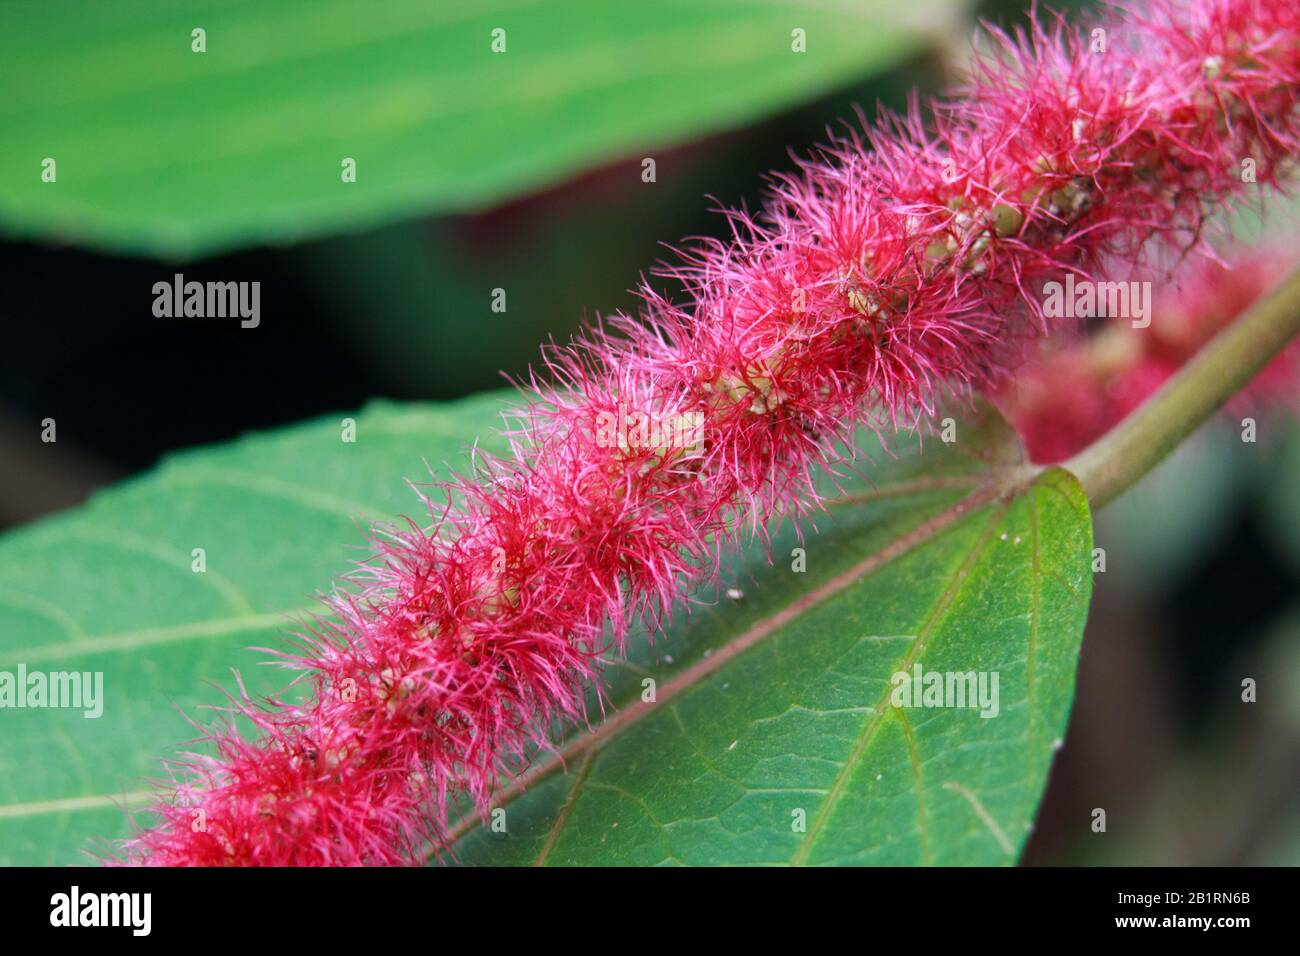 Section Close Up of Red Hot Cats Tail (Acalypha Hispida) On It's Own Green Leaf Stock Photo